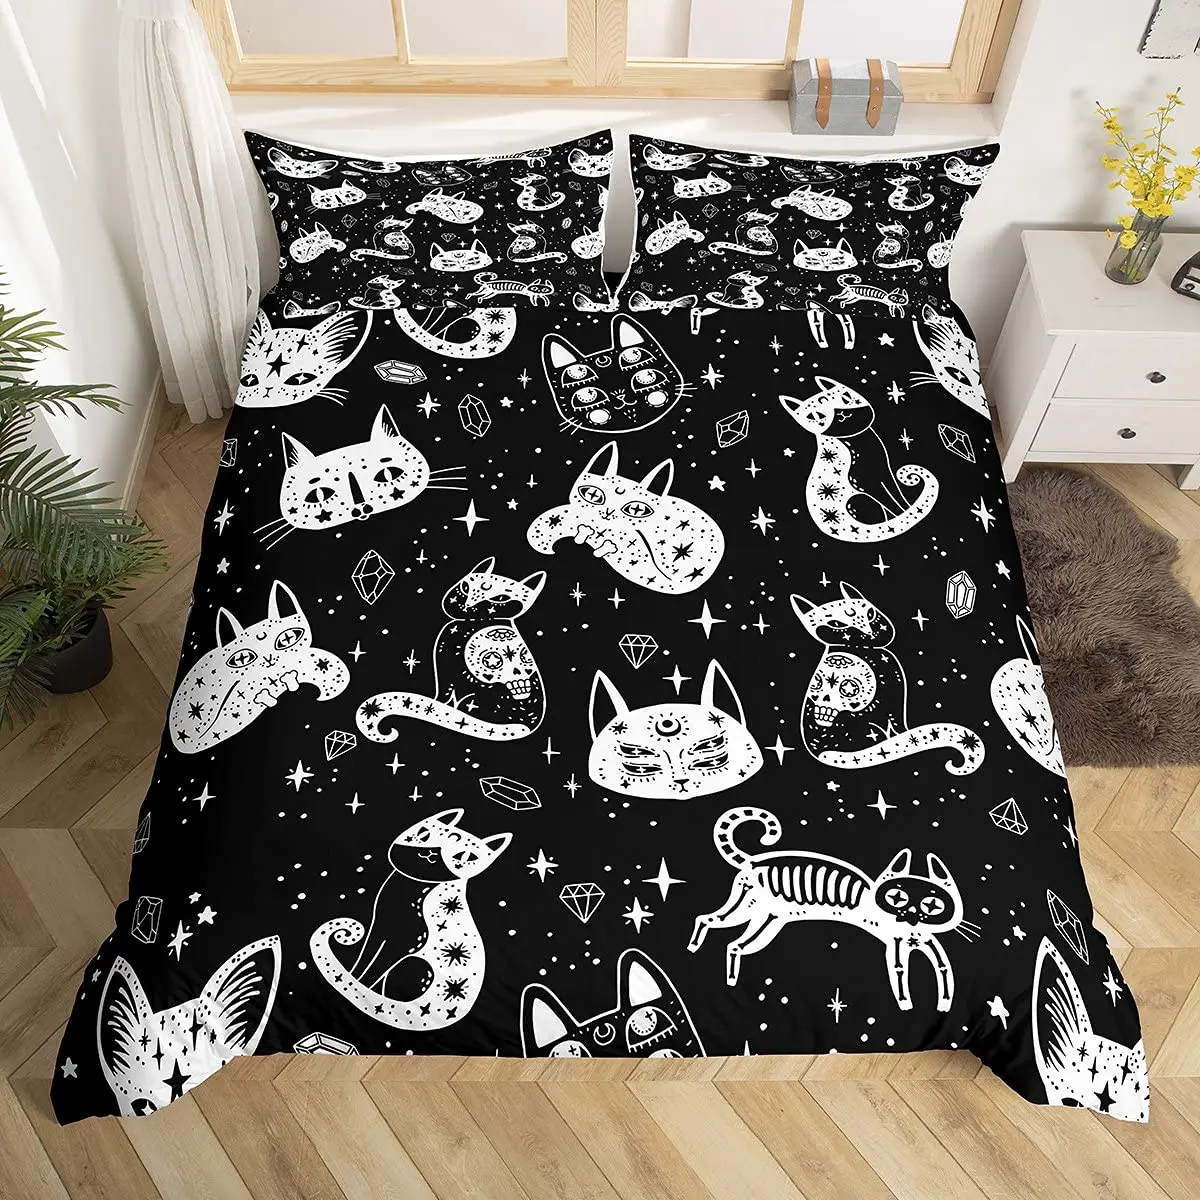 Full Queen,halloween Gothic Skull Bedding Set 2/3pcs,black＆white Galaxy Comforter Cover Quilt Cover